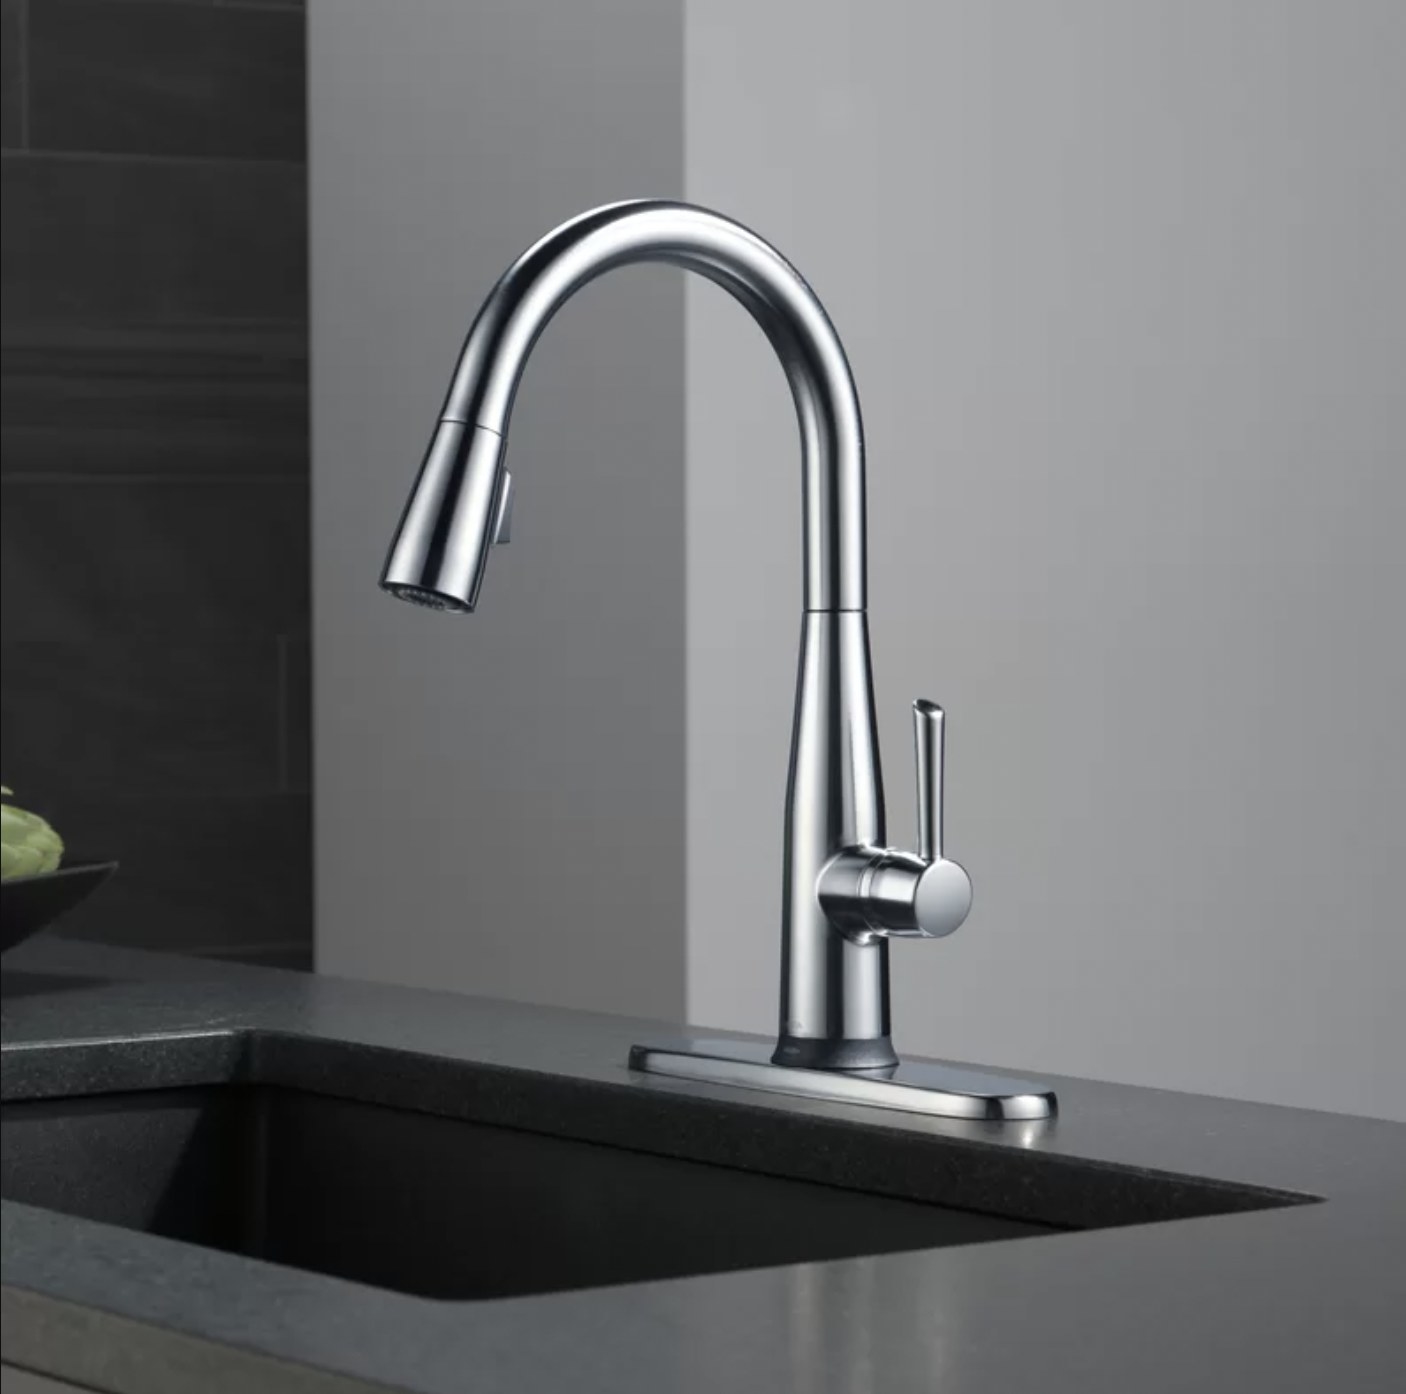 the silver satin finish faucet